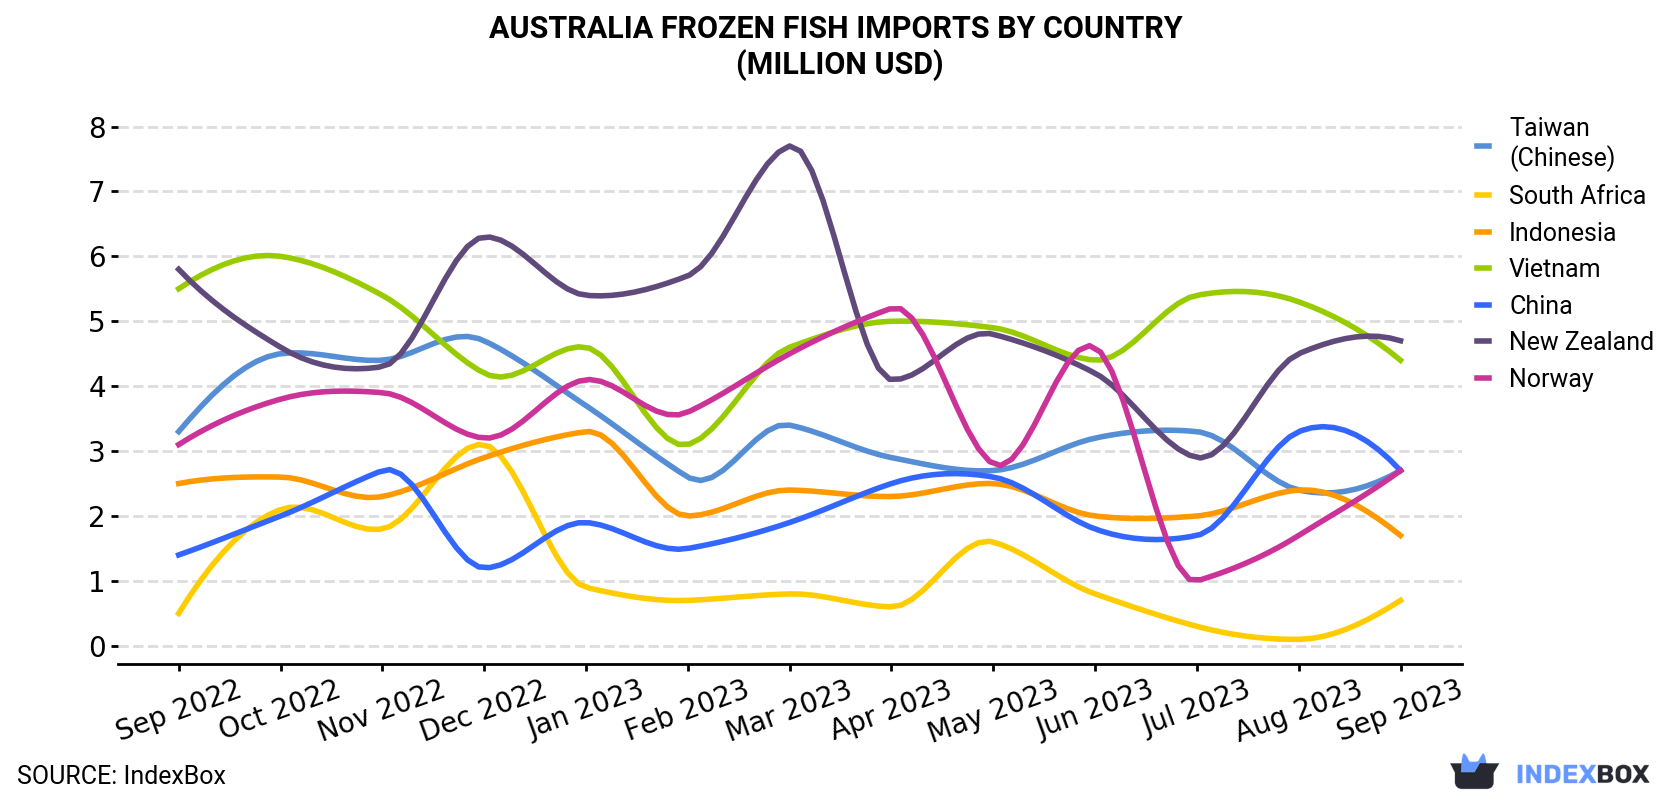 Australia Frozen Fish Imports By Country (Million USD)